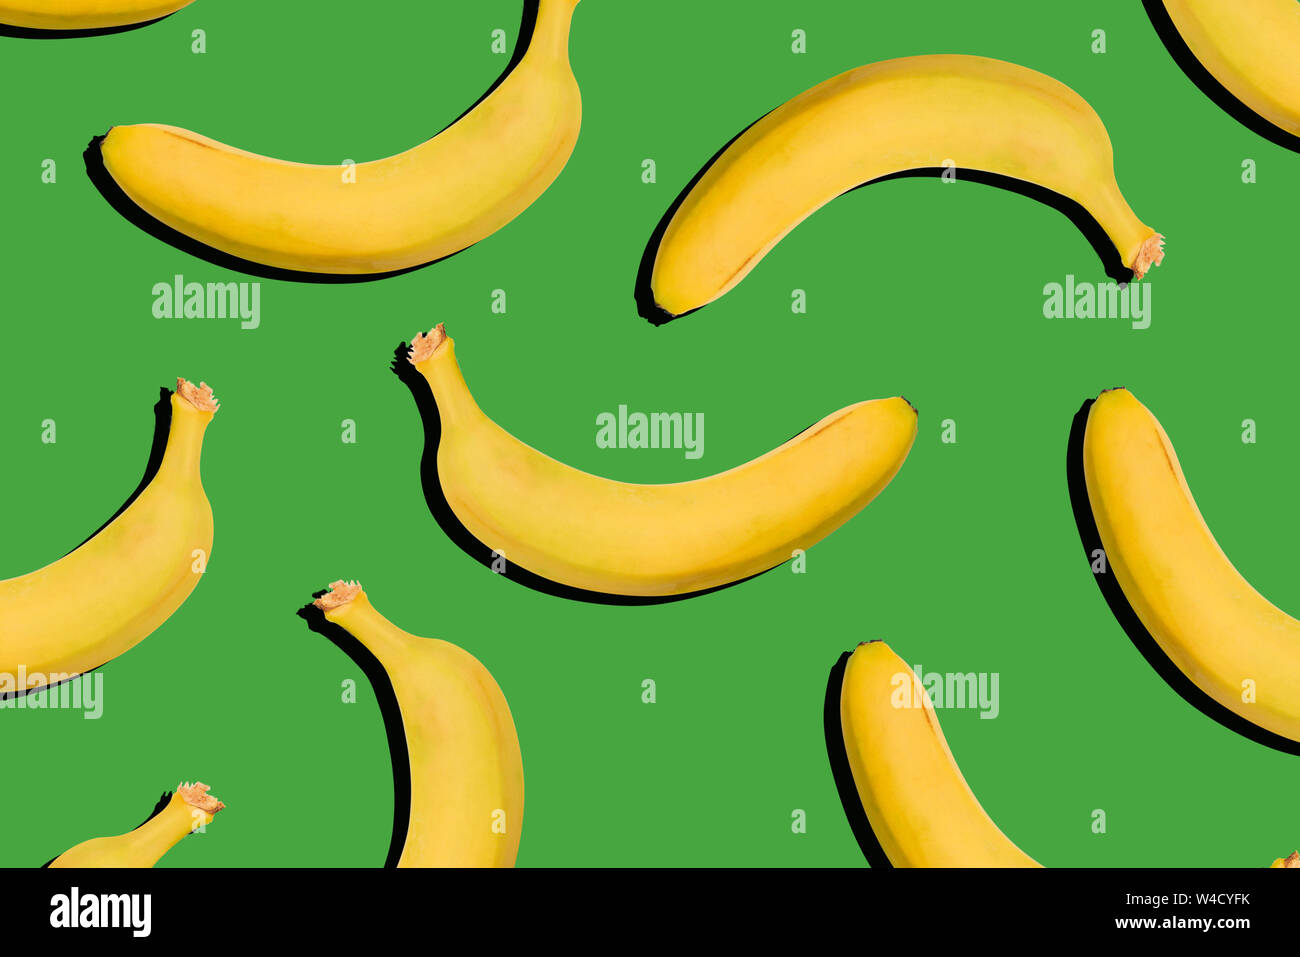 Bananas on a green background. Healthy food, nutrition concept. Creative style, modern art Stock Photo